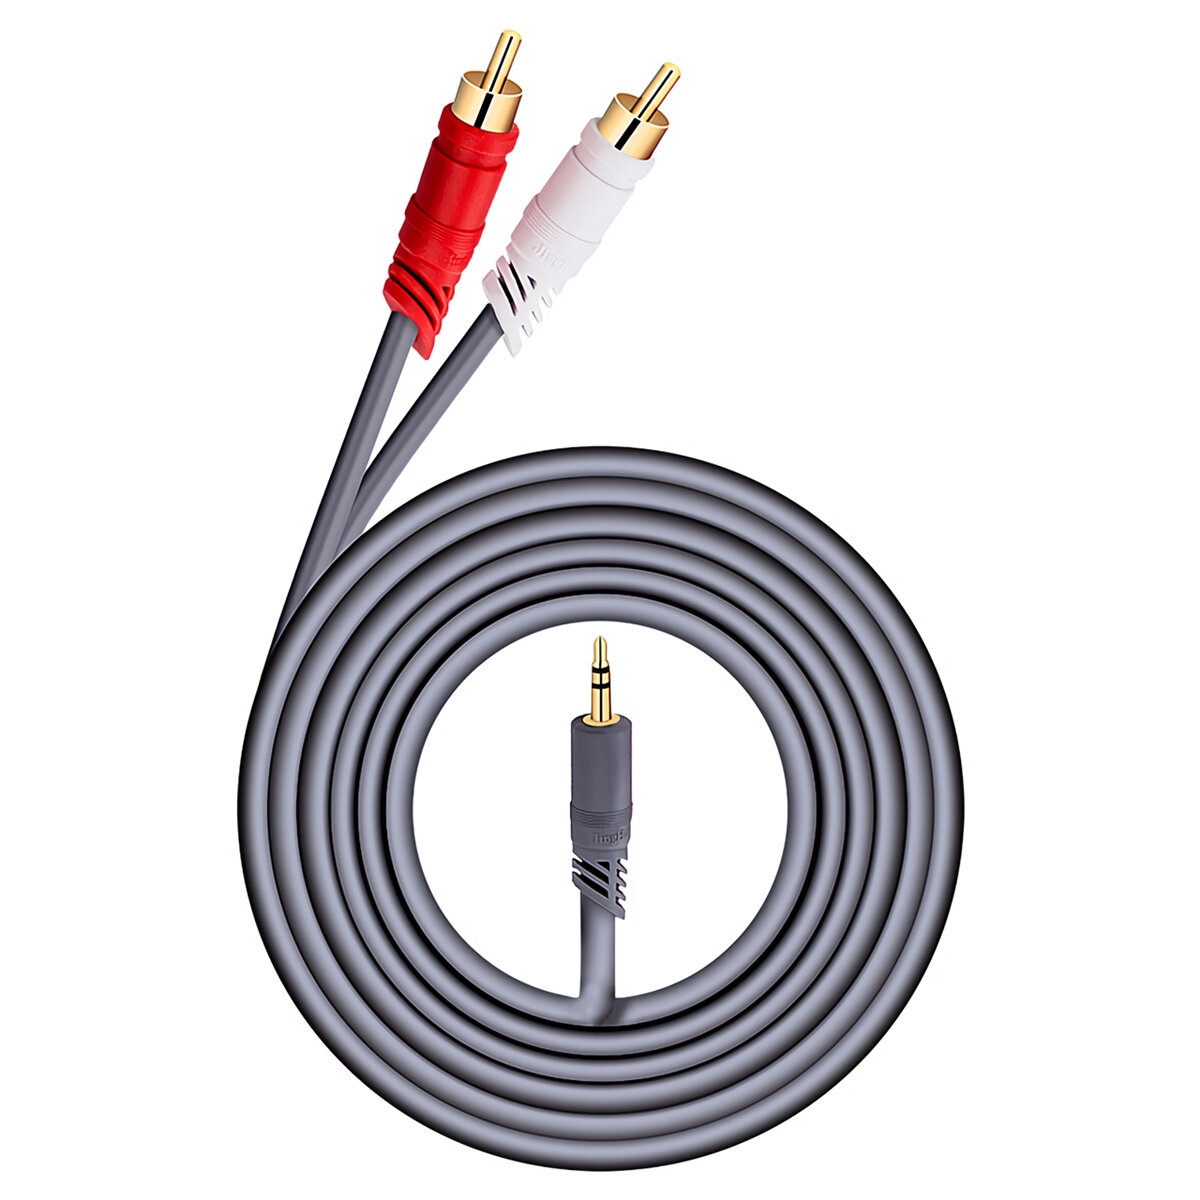 

Bakeey 3.5mm to 2RCA Audio Cable 3.5mm HiFi Stereo RCA AUX Cable Y Splitter Cable for Mobile Phones Computers Amplifiers